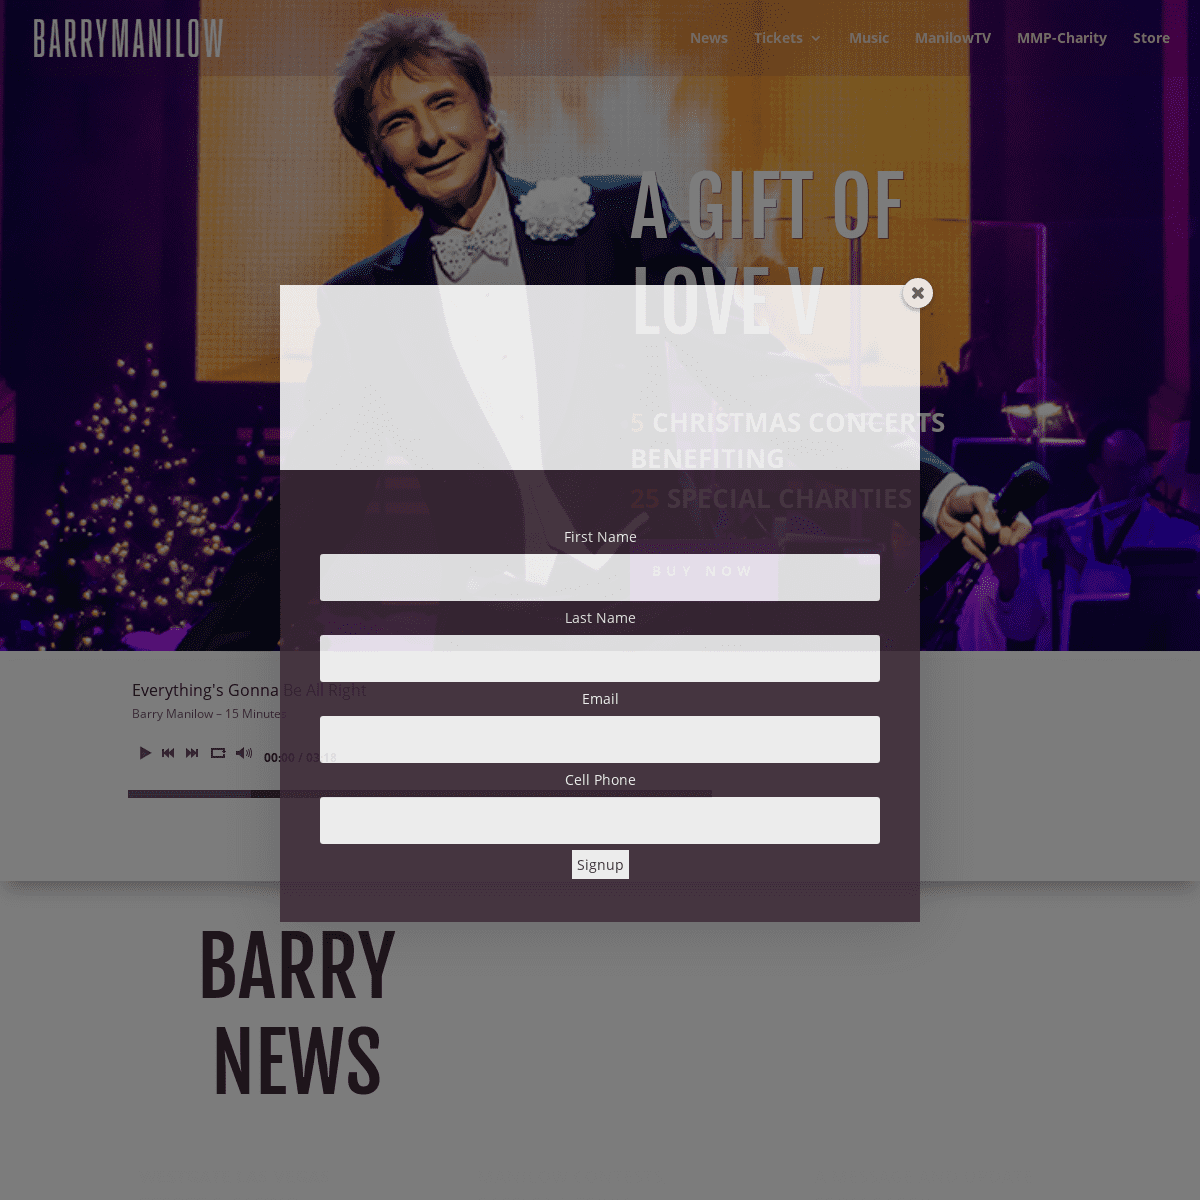 A complete backup of https://barrymanilow.com